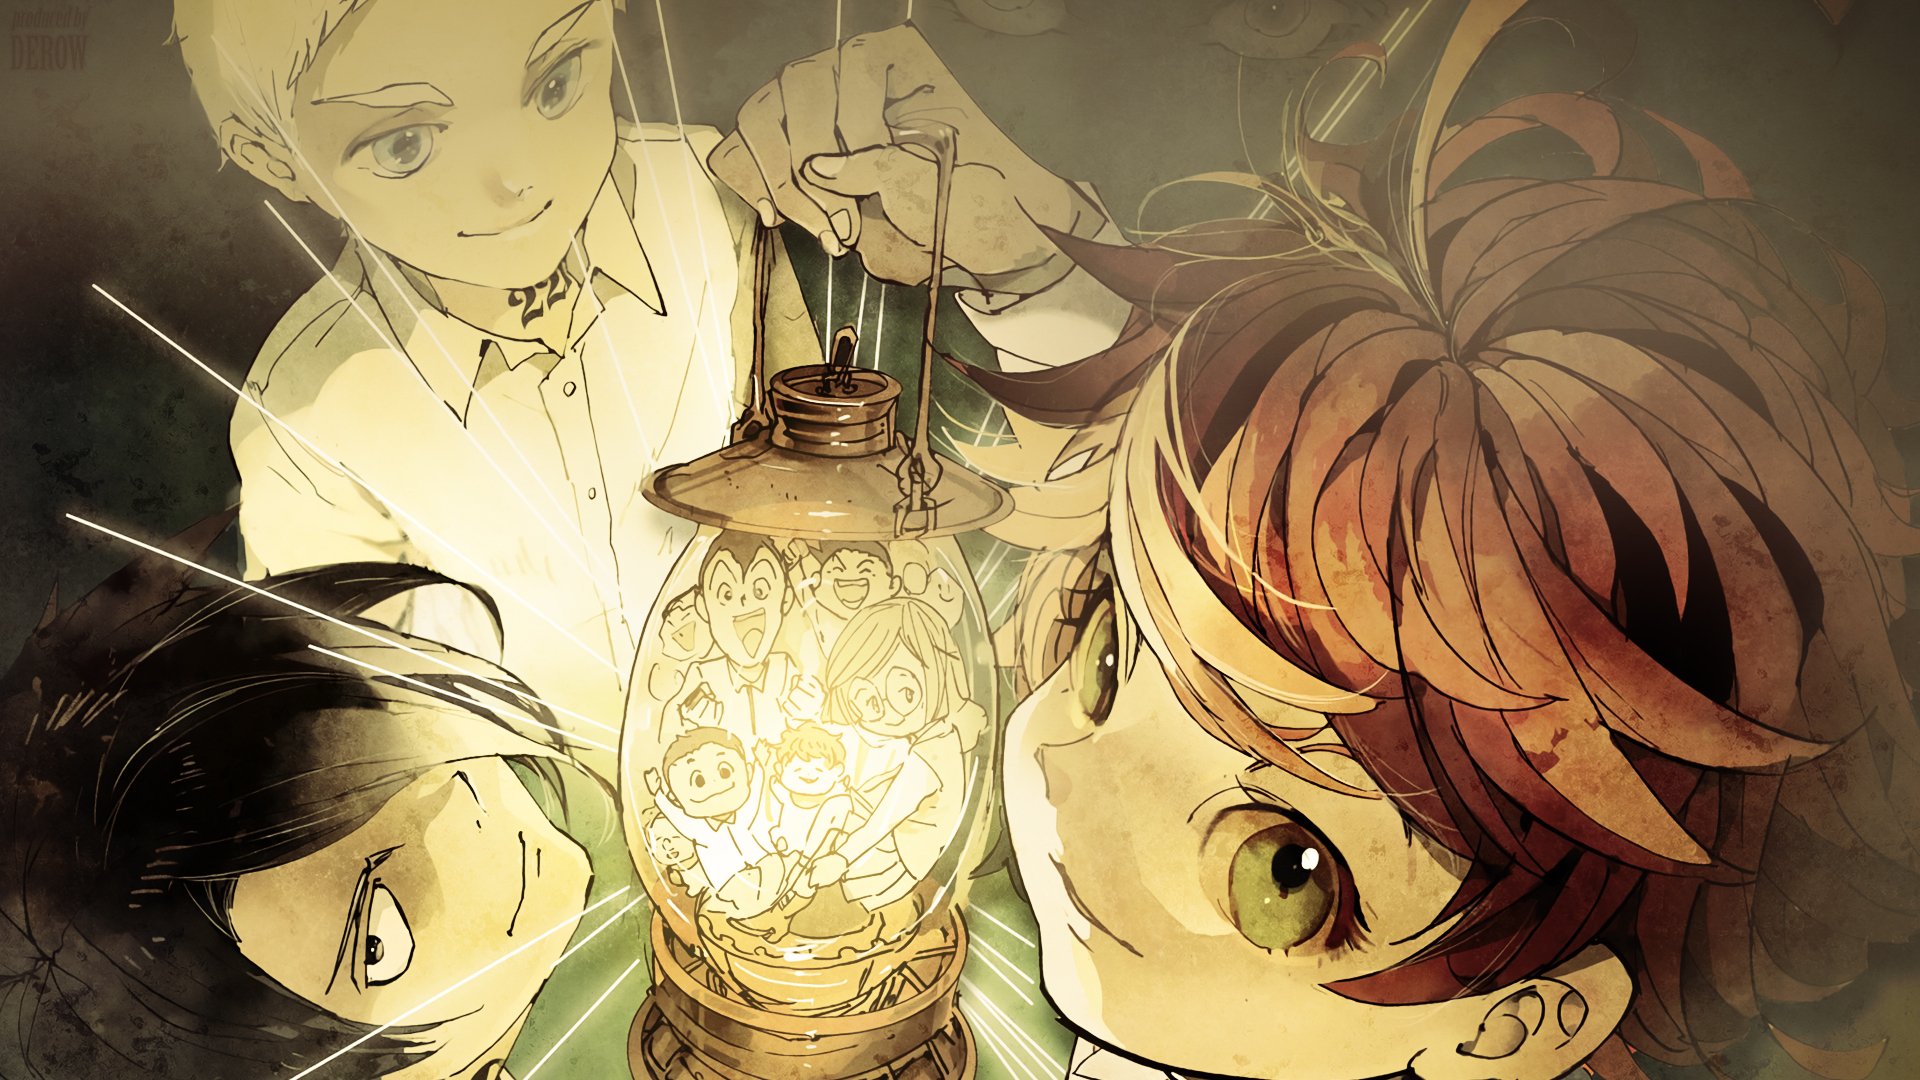 Anime The Promised Neverland Hd Wallpaper By Derowdesign